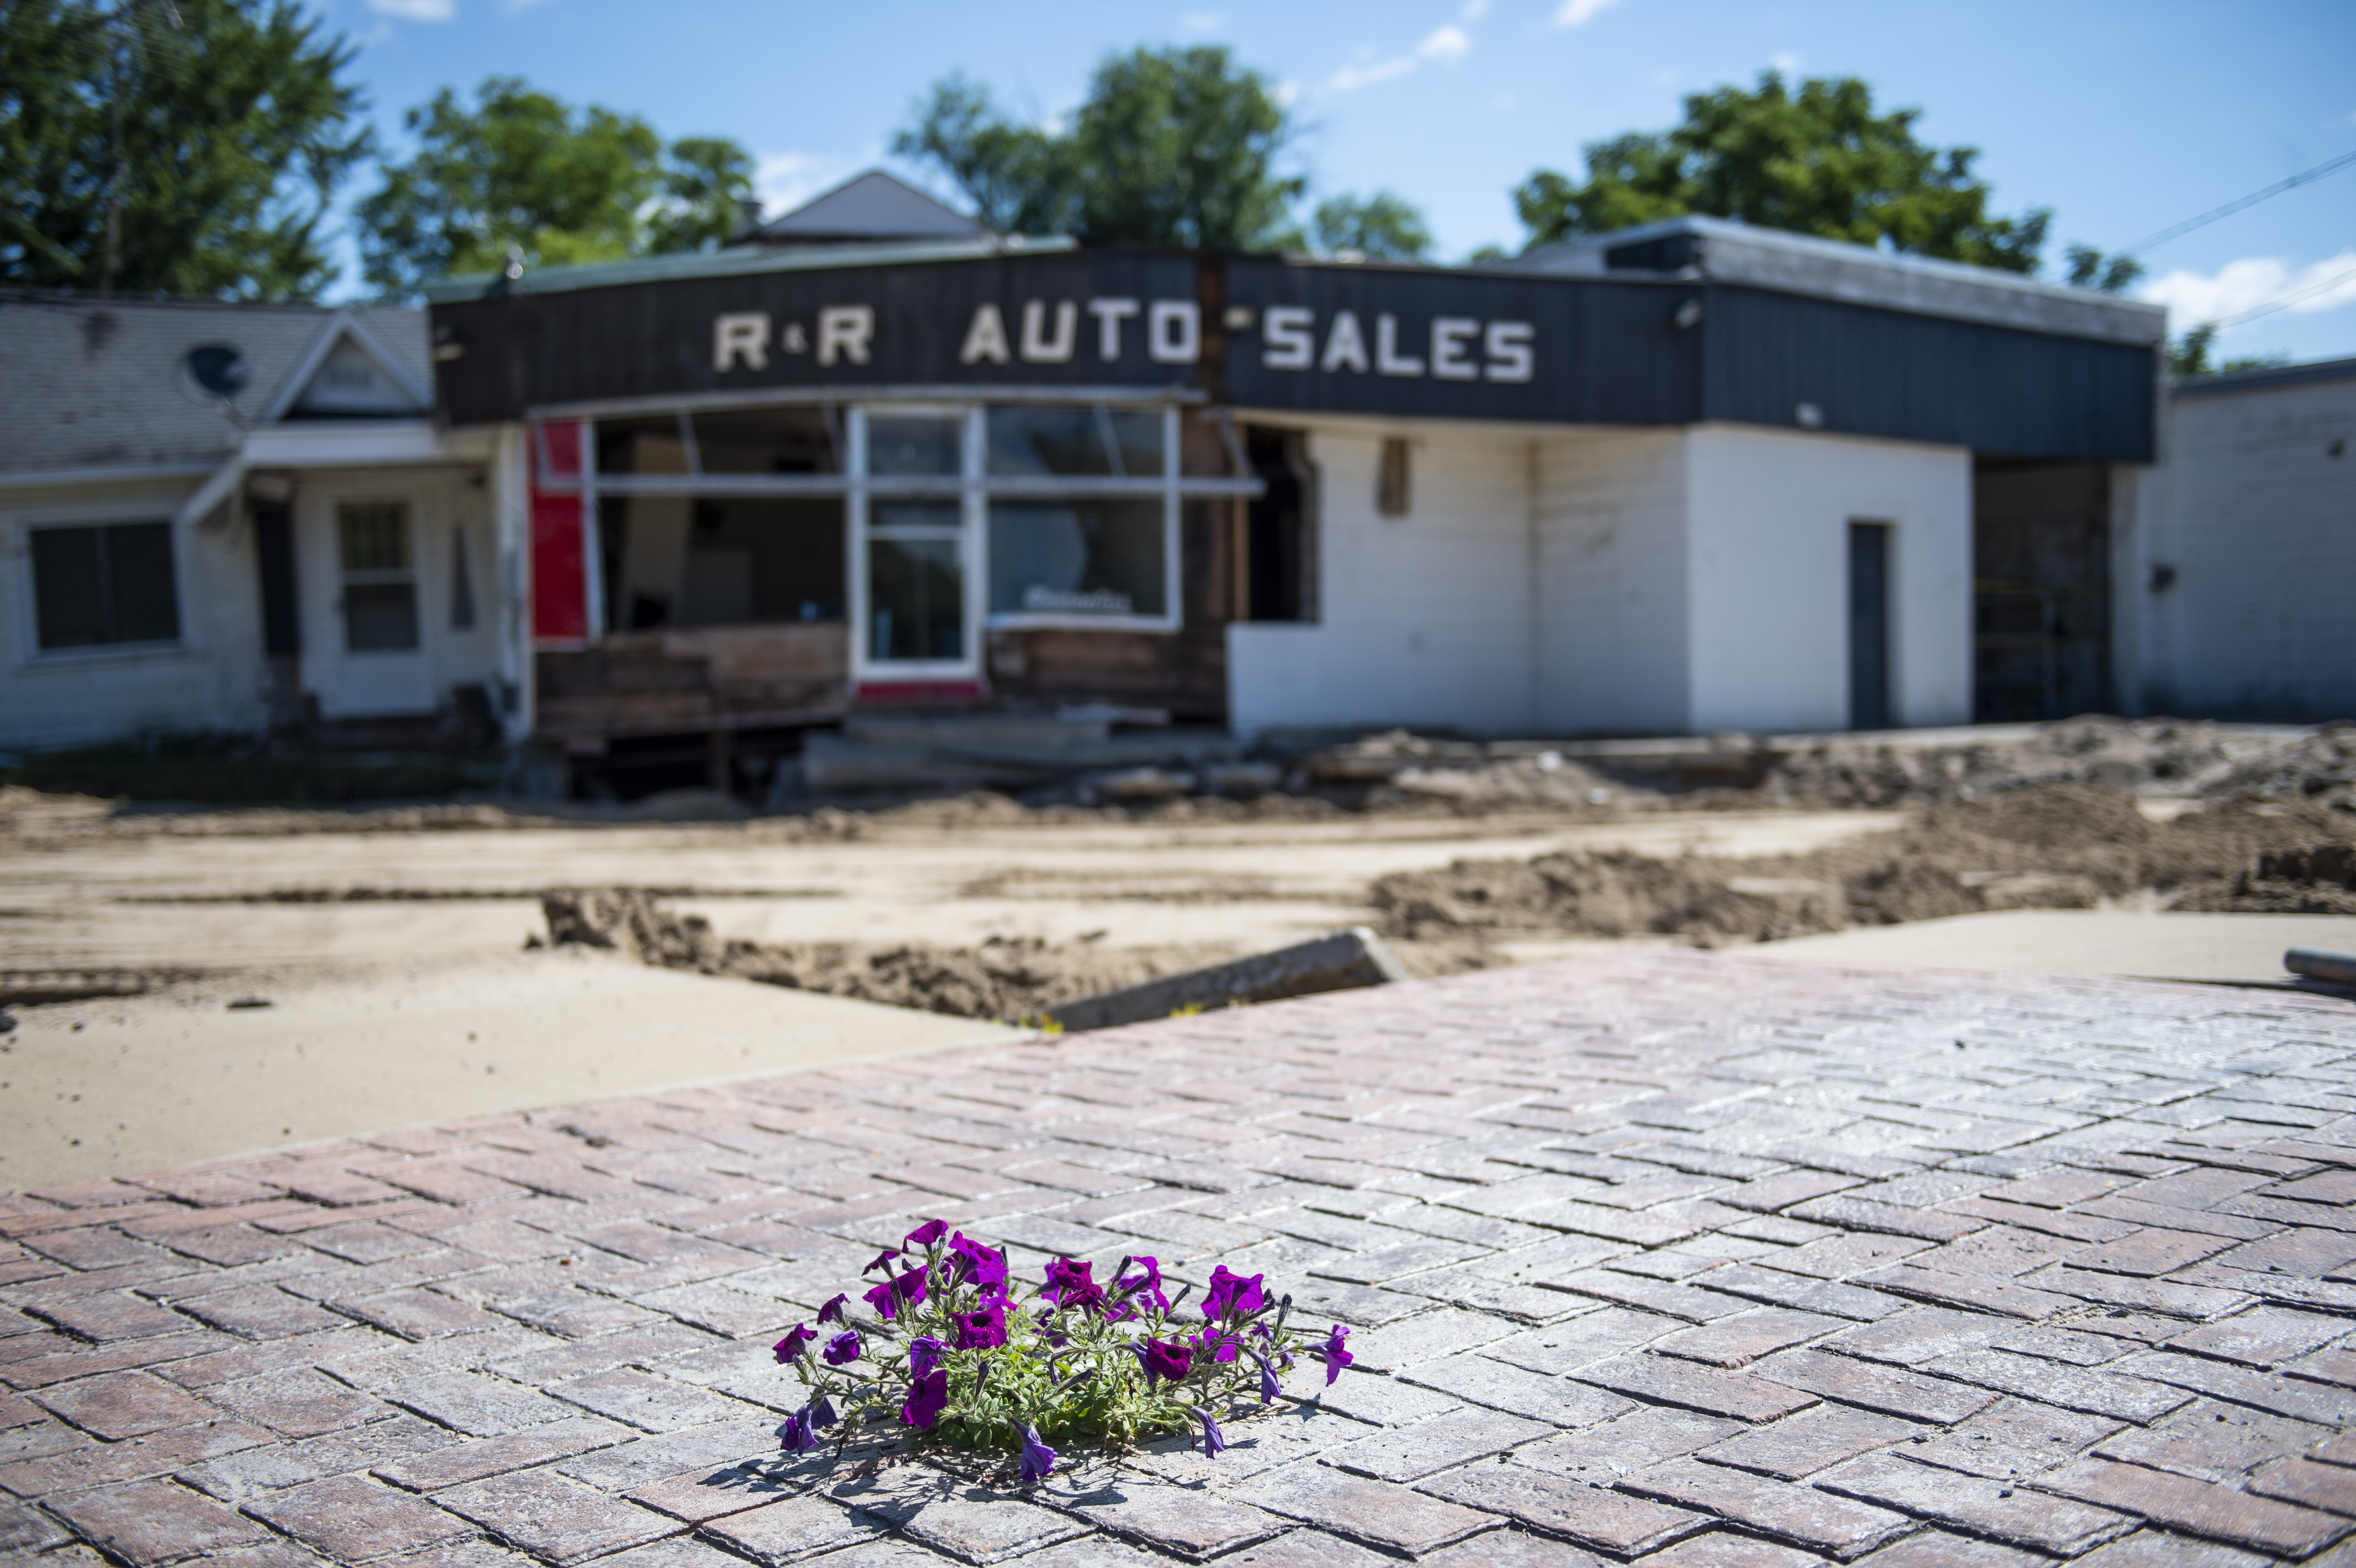 Flowers grow through the brick in front of R and R Auto Sales near the Sanford Dam in Sanford on Thursday, July 30, 2020. The devastating flood in May gushed over the majority of land in this area. (Kaytie Boomer | MLive.com)